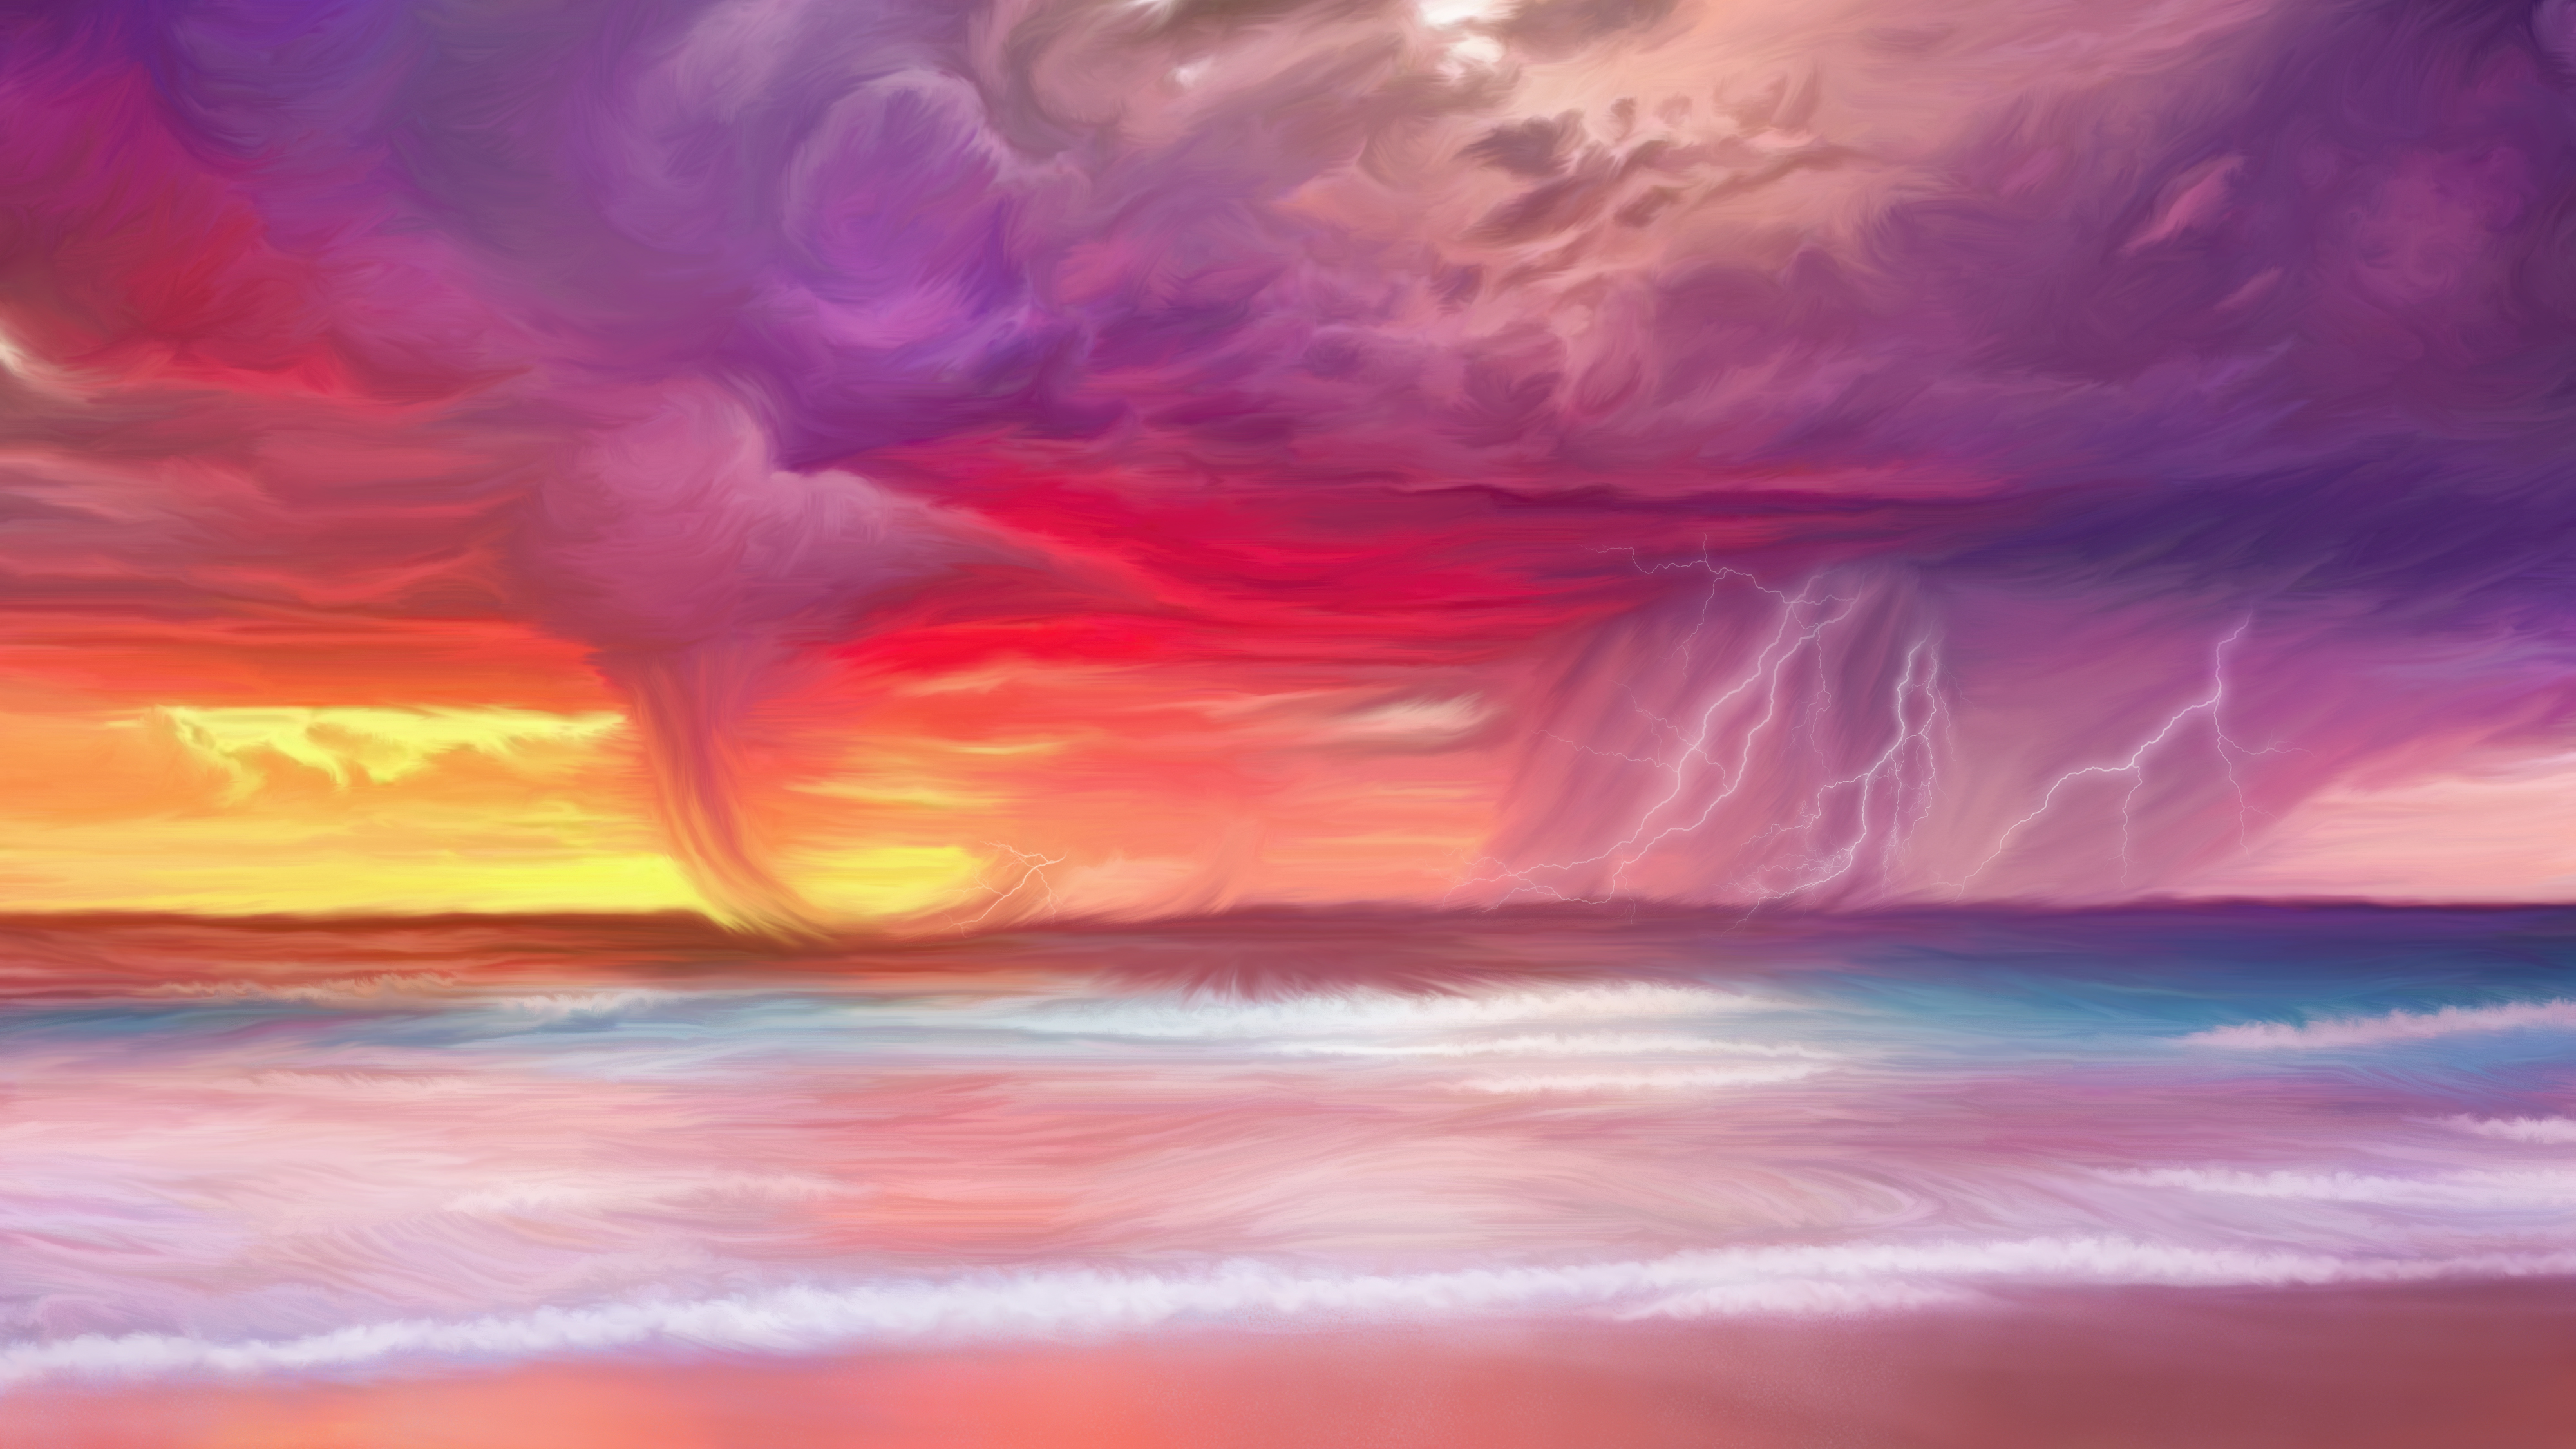 Ocean storm sea painting hd artist k wallpapers images backgrounds photos and pictures